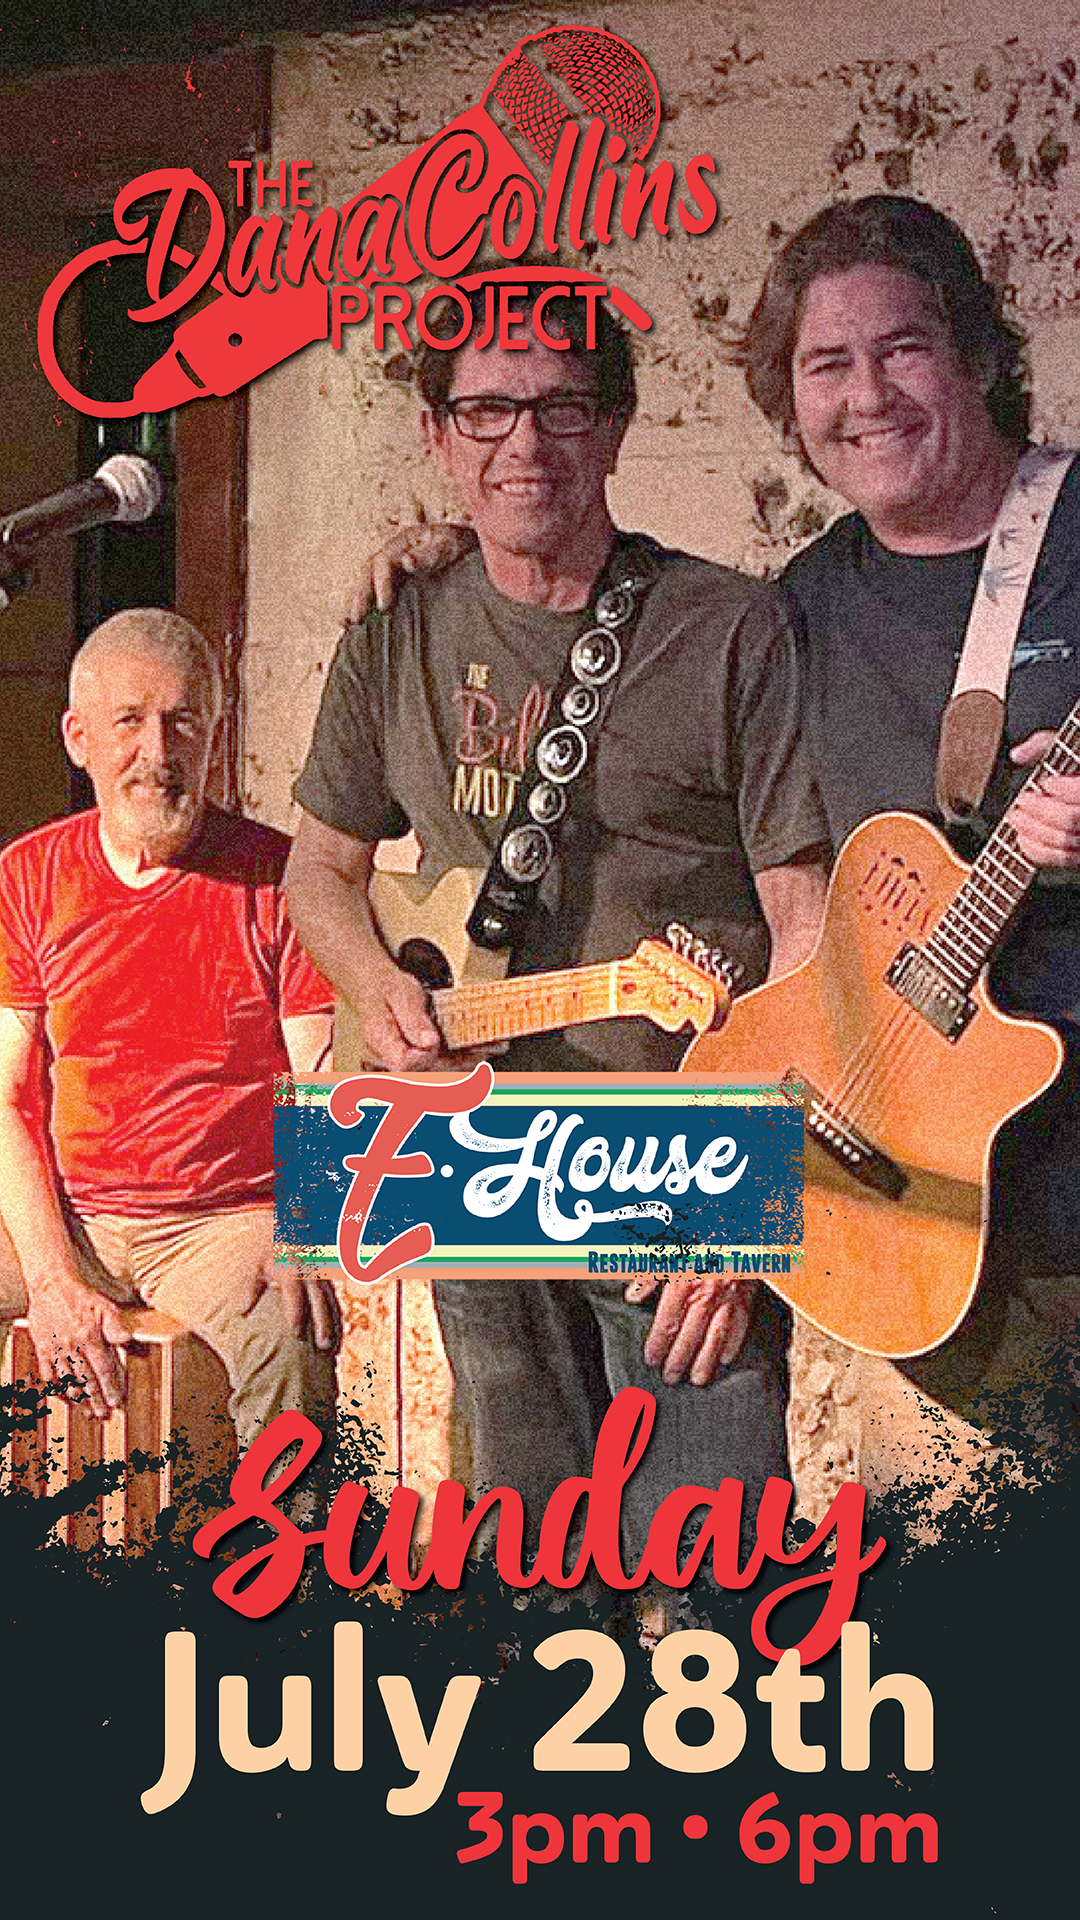 Three musicians pose with their instruments. Text on the image reads: "The Dana Collins Project", "E House Restaurant and Tavern", and "Sunday July 28th, 3pm - 6pm".